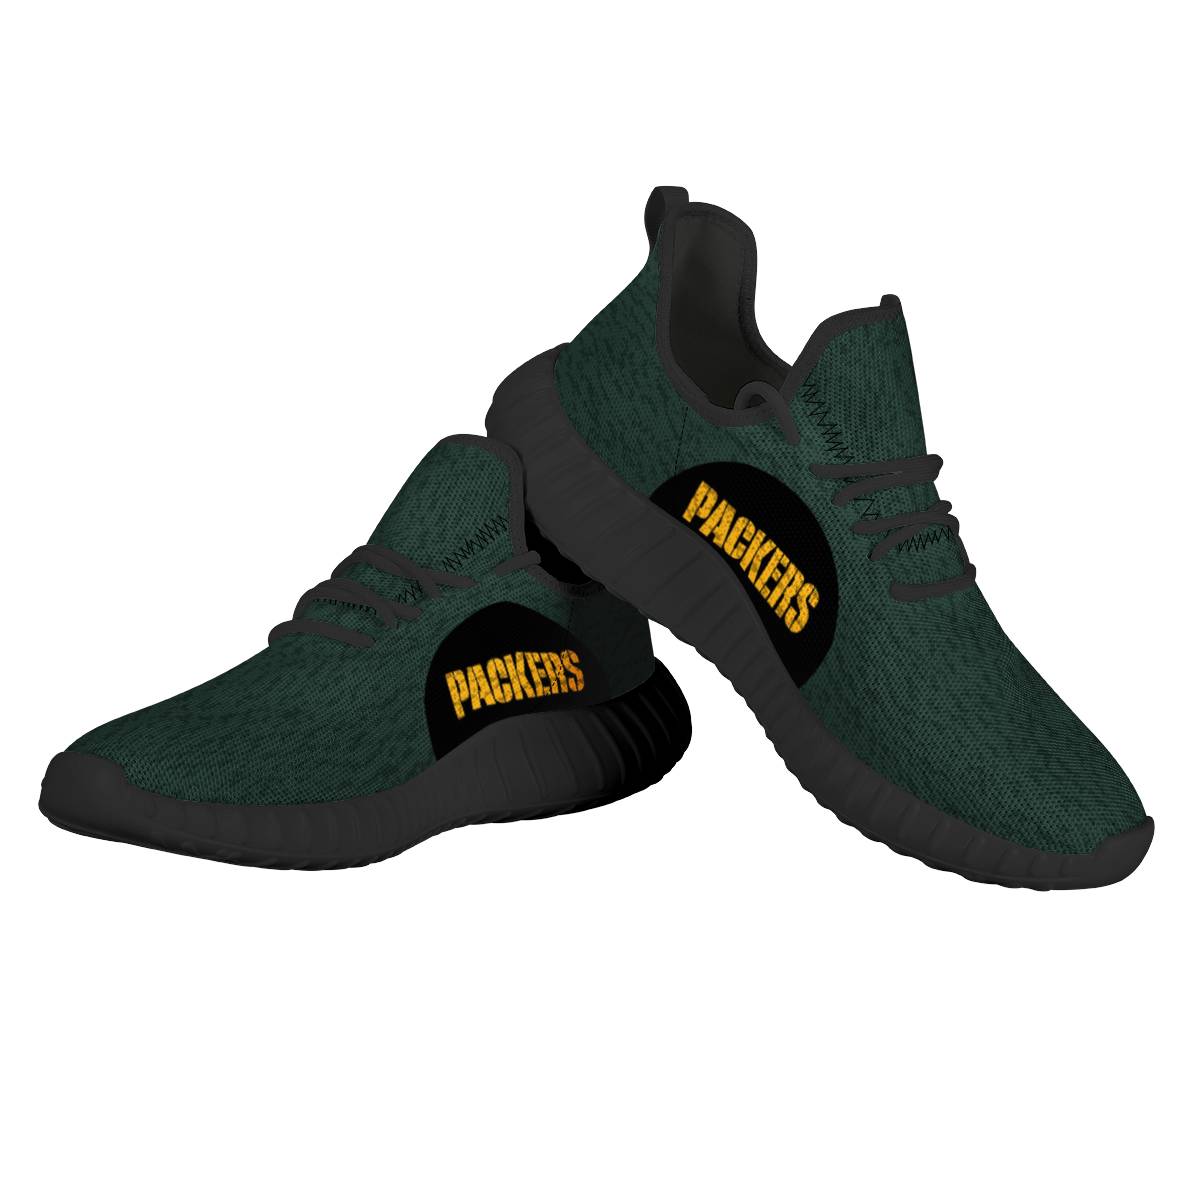 Men's NFL Green Bay Packers Mesh Knit Sneakers/Shoes 001